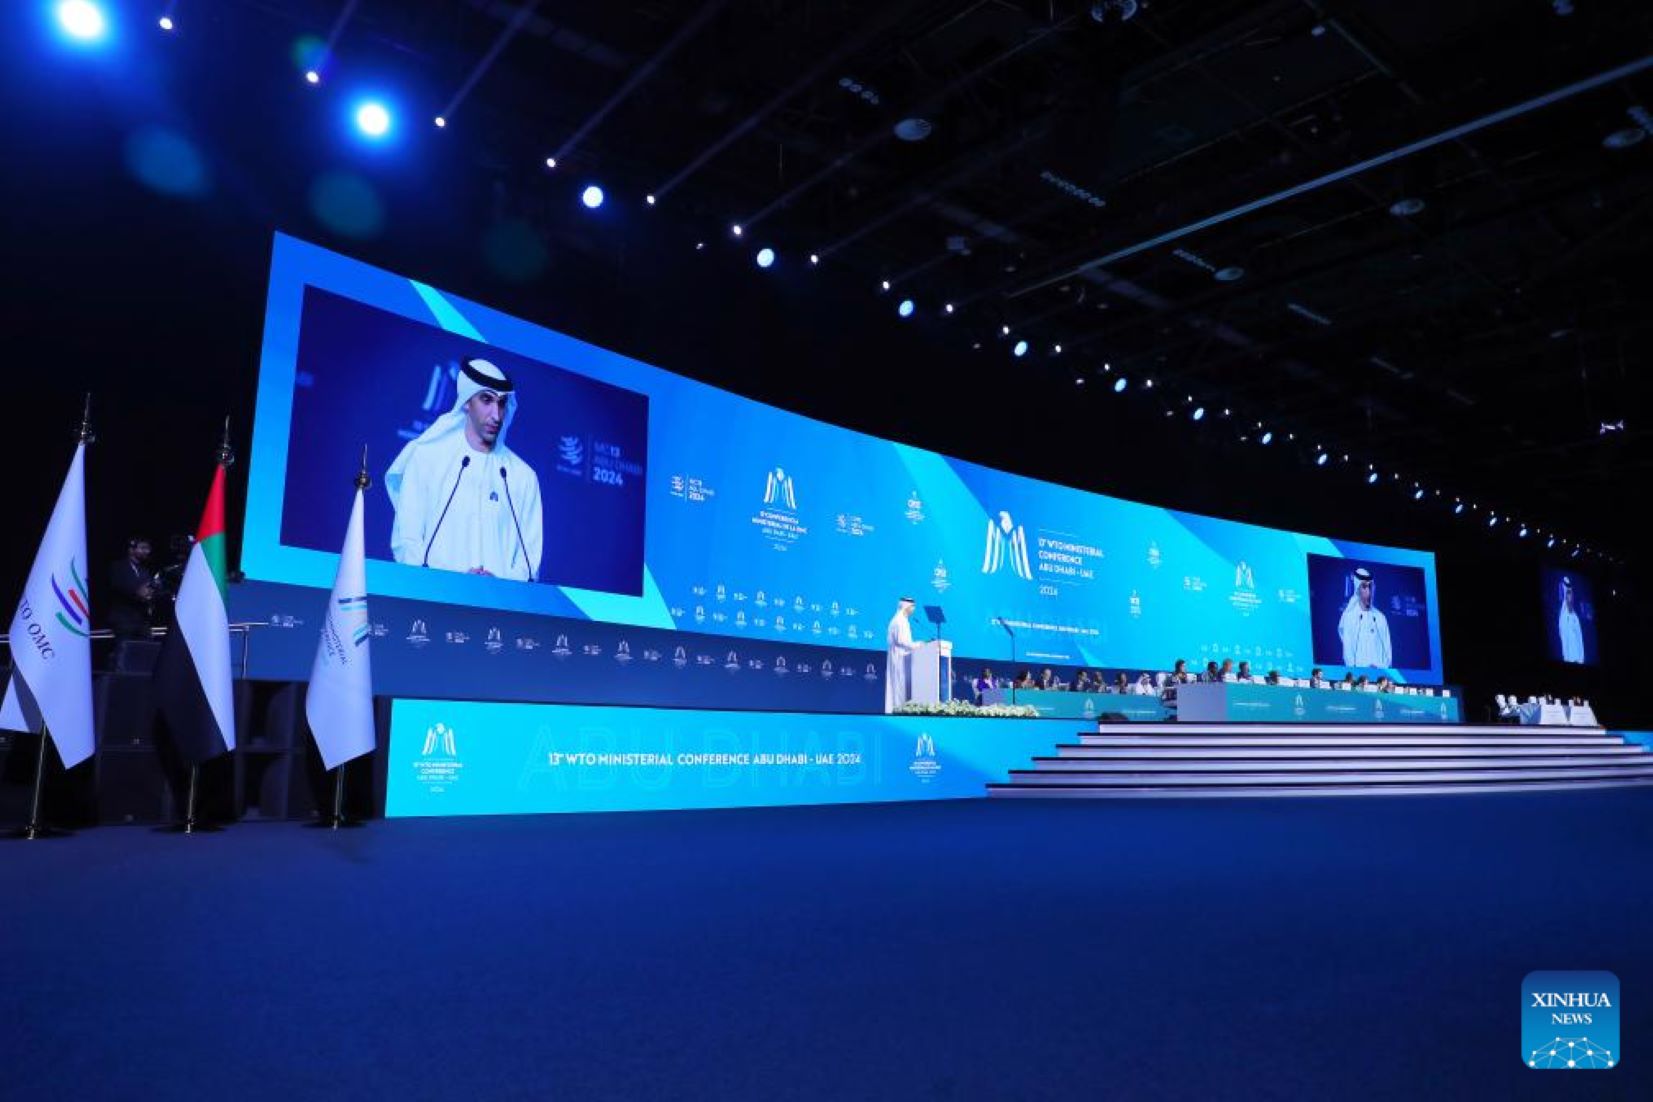 13th Ministerial Conference Of WTO Opened In Abu Dhabi